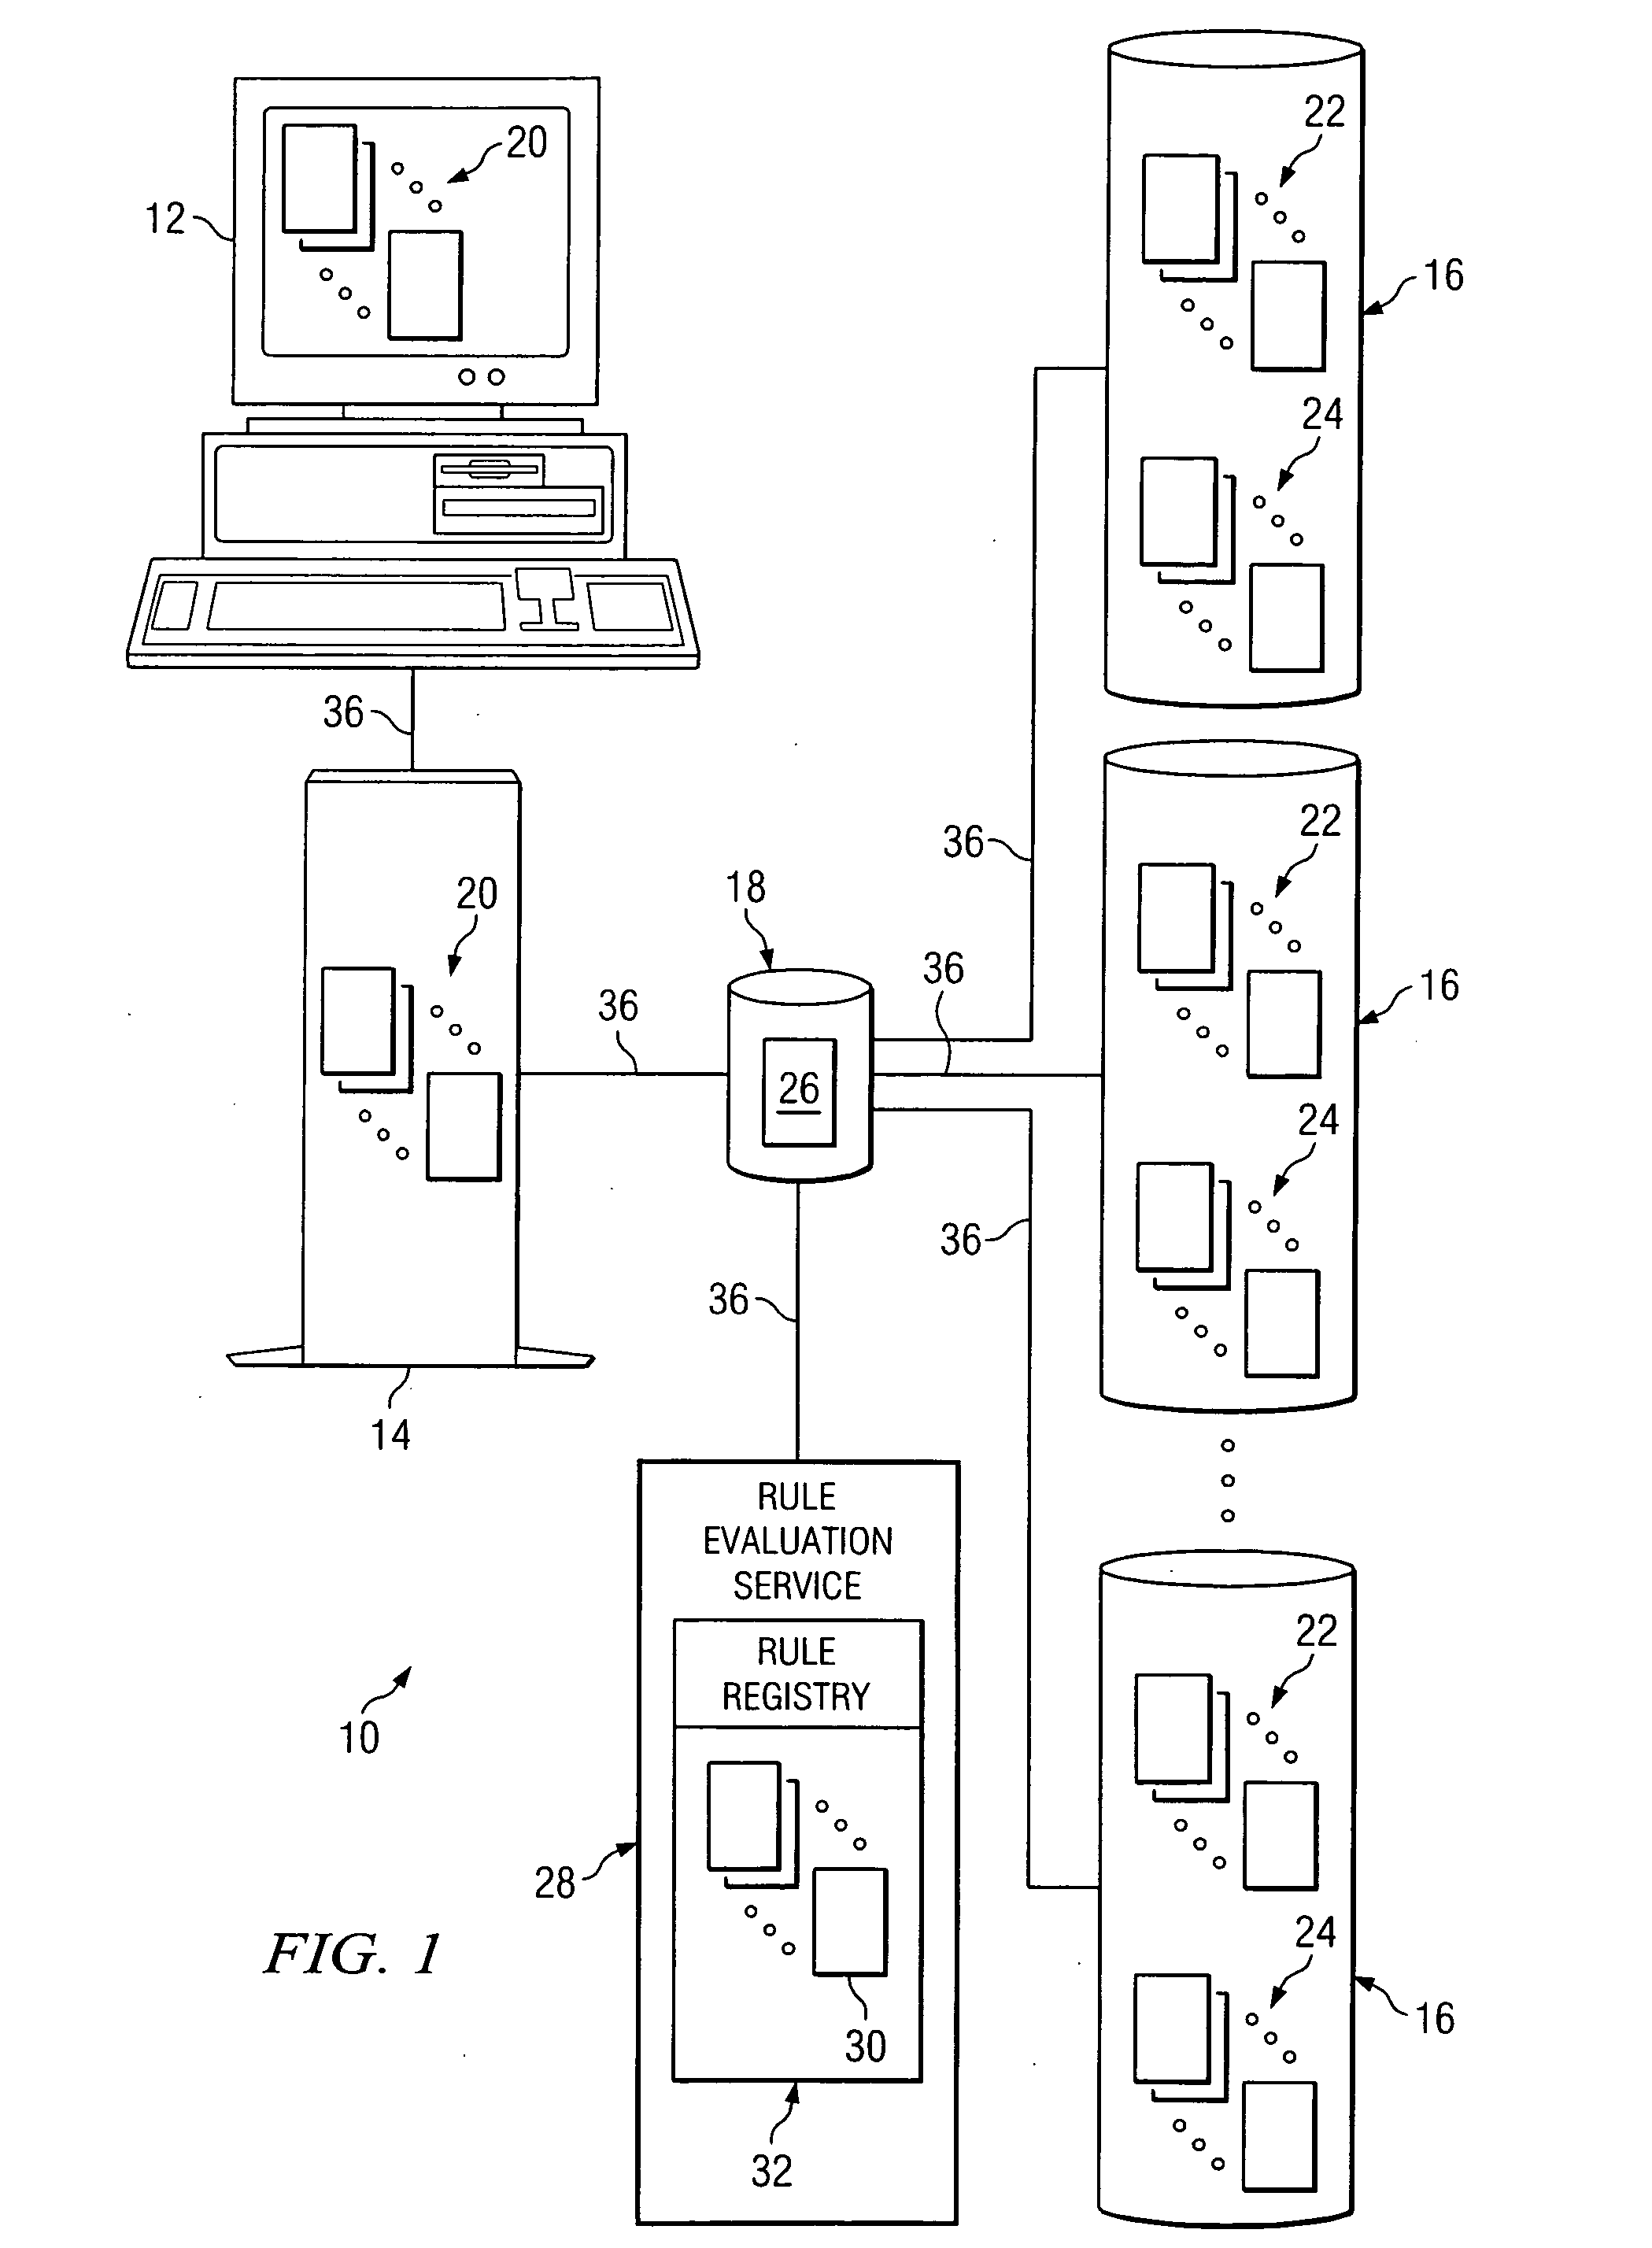 System, method, and software for implementing business rules in an entity